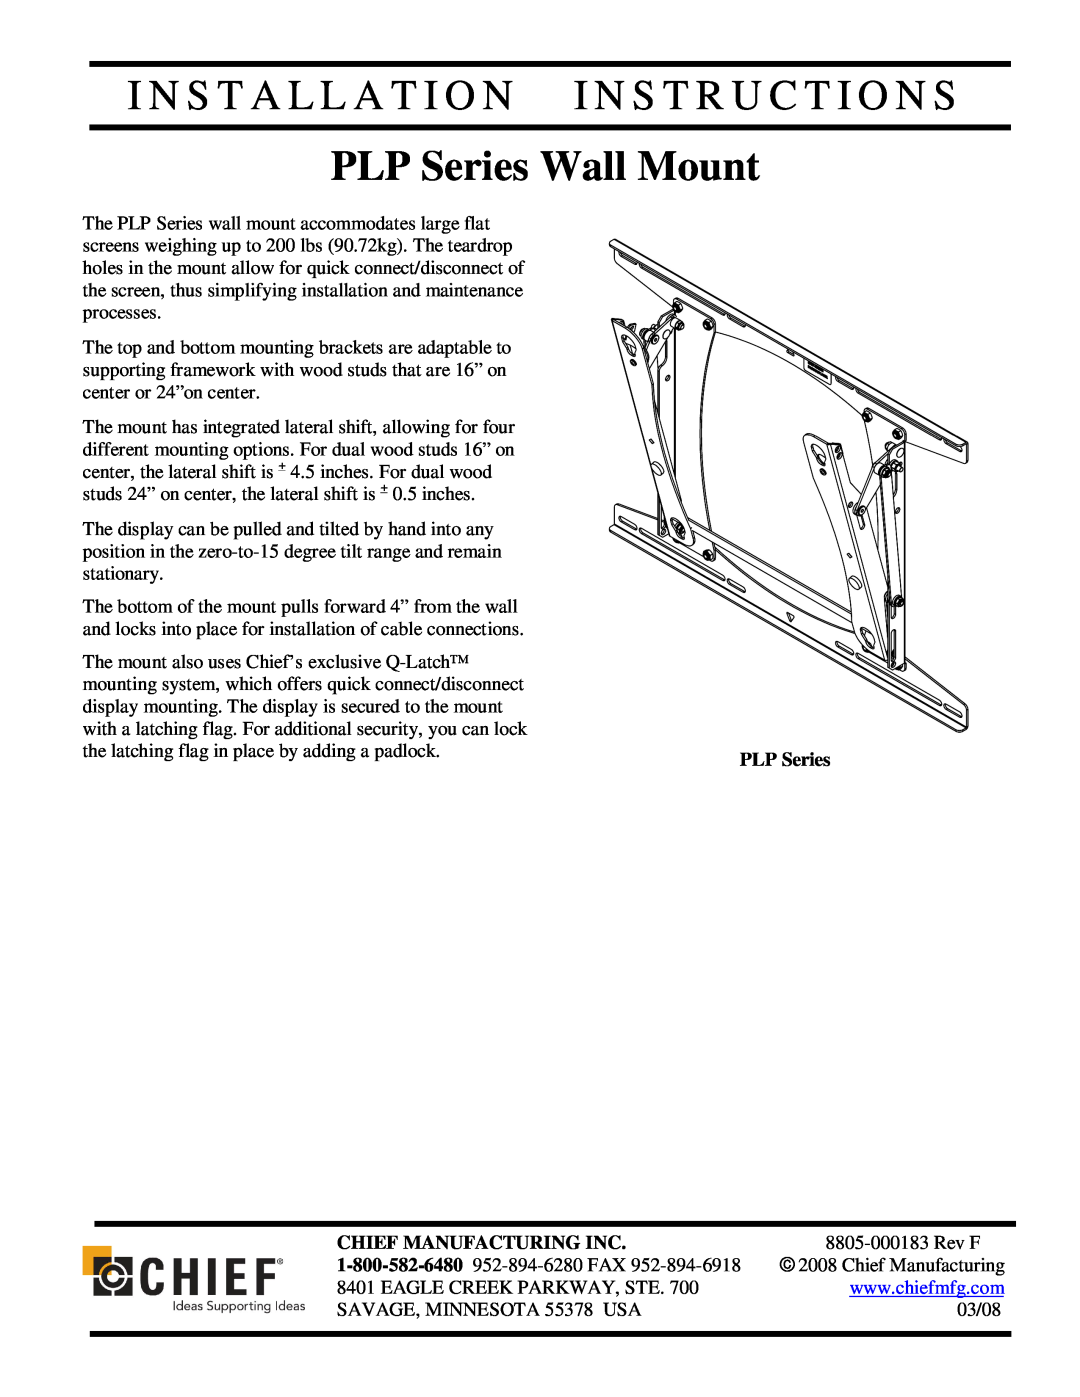 Chief Manufacturing installation instructions Chief Manufacturing Inc, PLP Series Wall Mount 